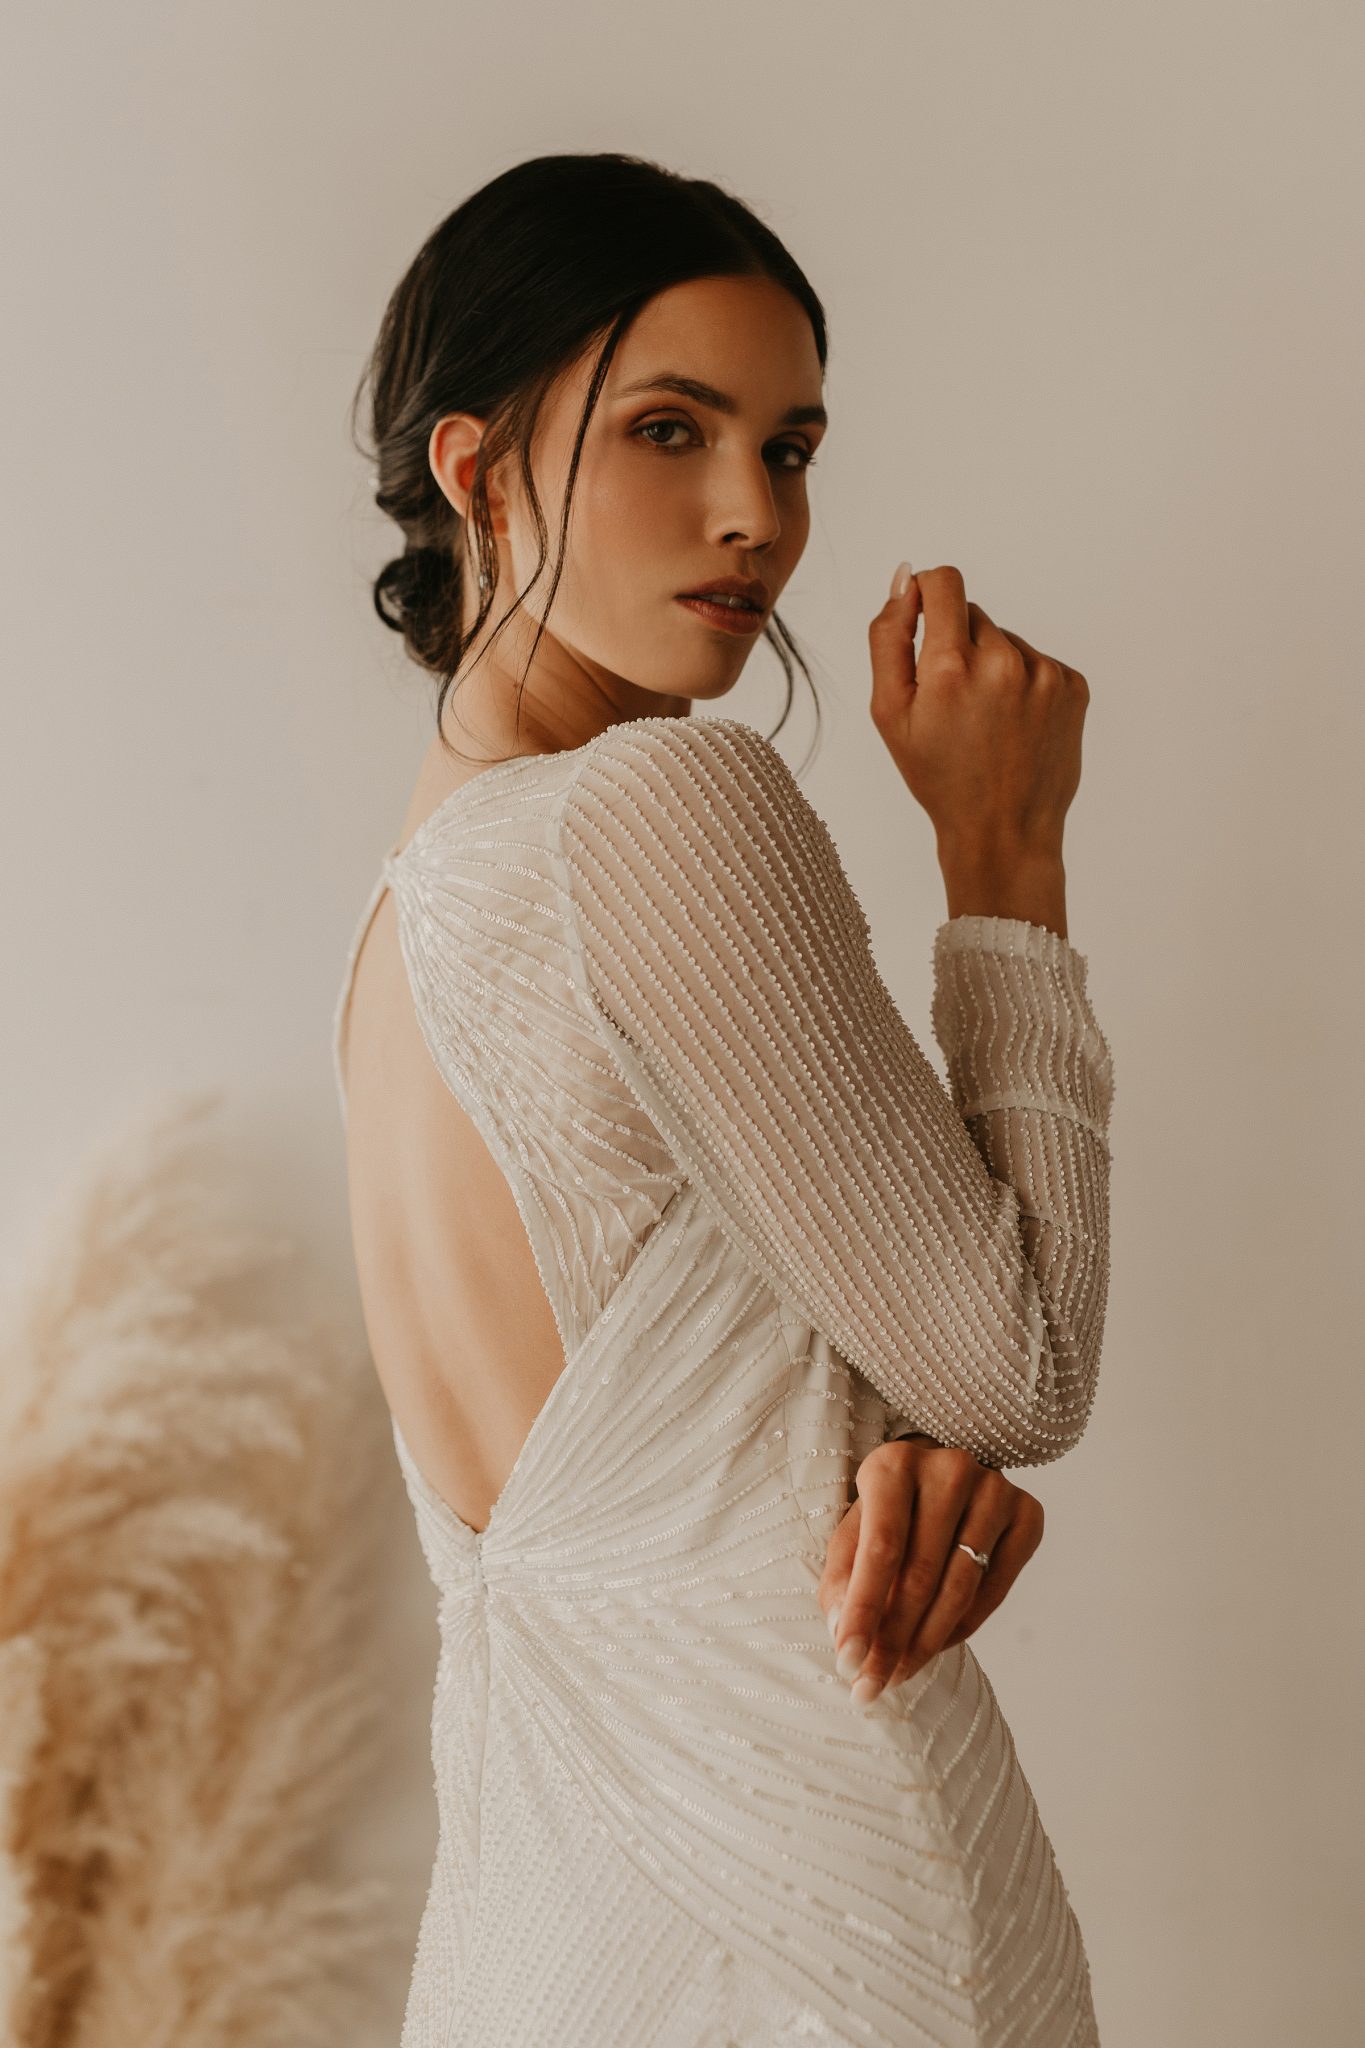 Bridal Minimalism Feature on Bronte Bride: Delica Bridal Shares All About New Bridal Trends & Dress Shopping During Covid